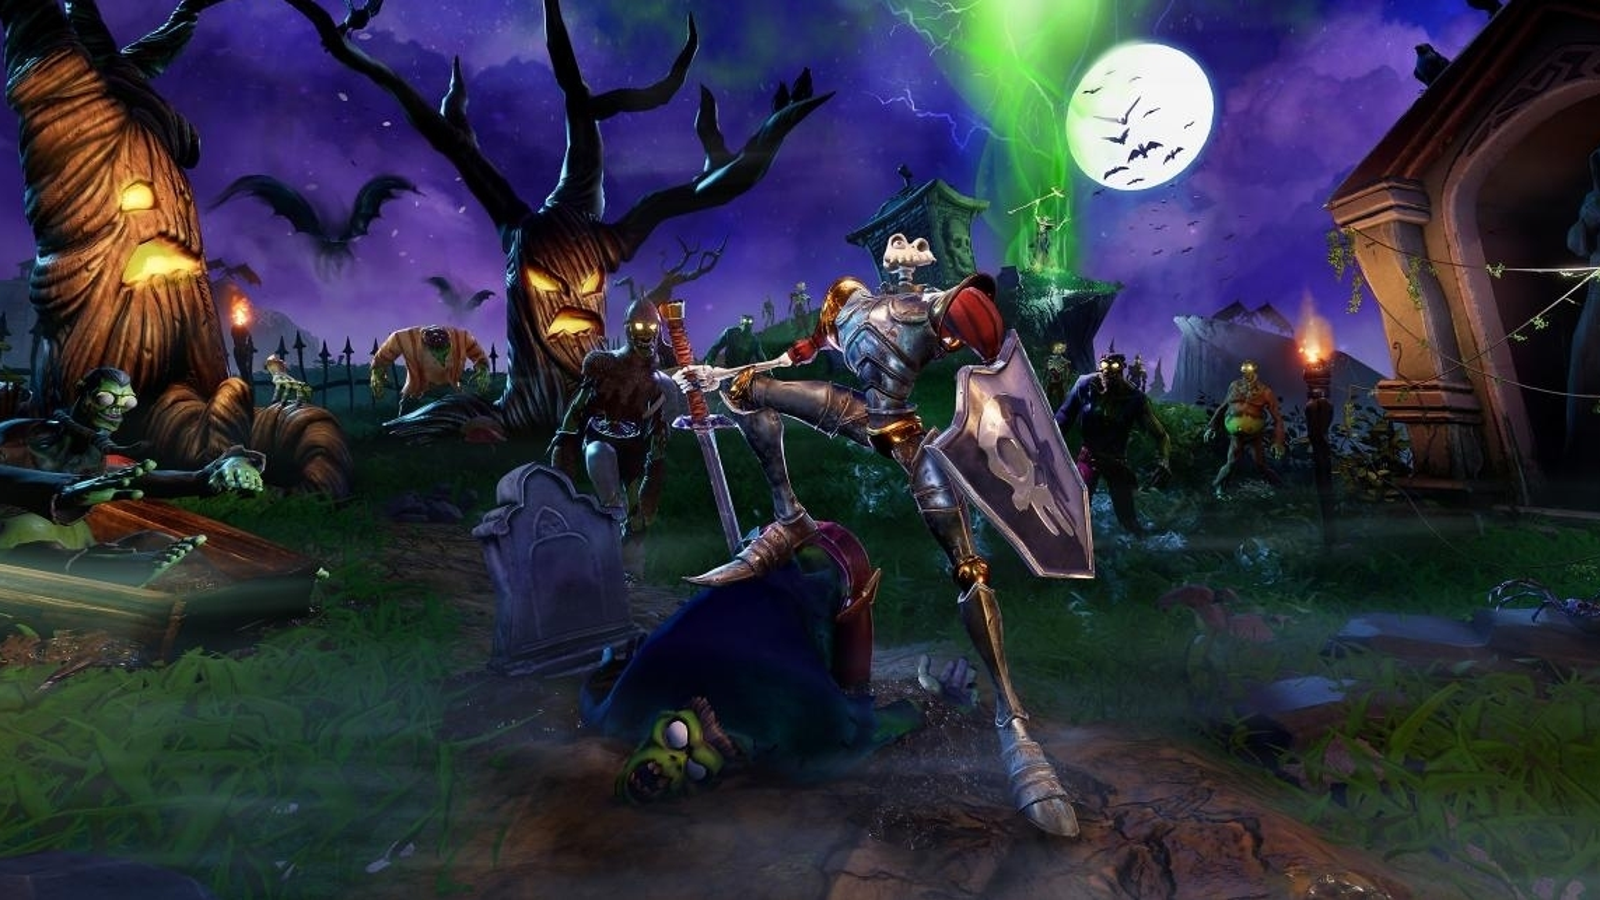 MediEvil is one of the greatest remakes of one the OG action games.